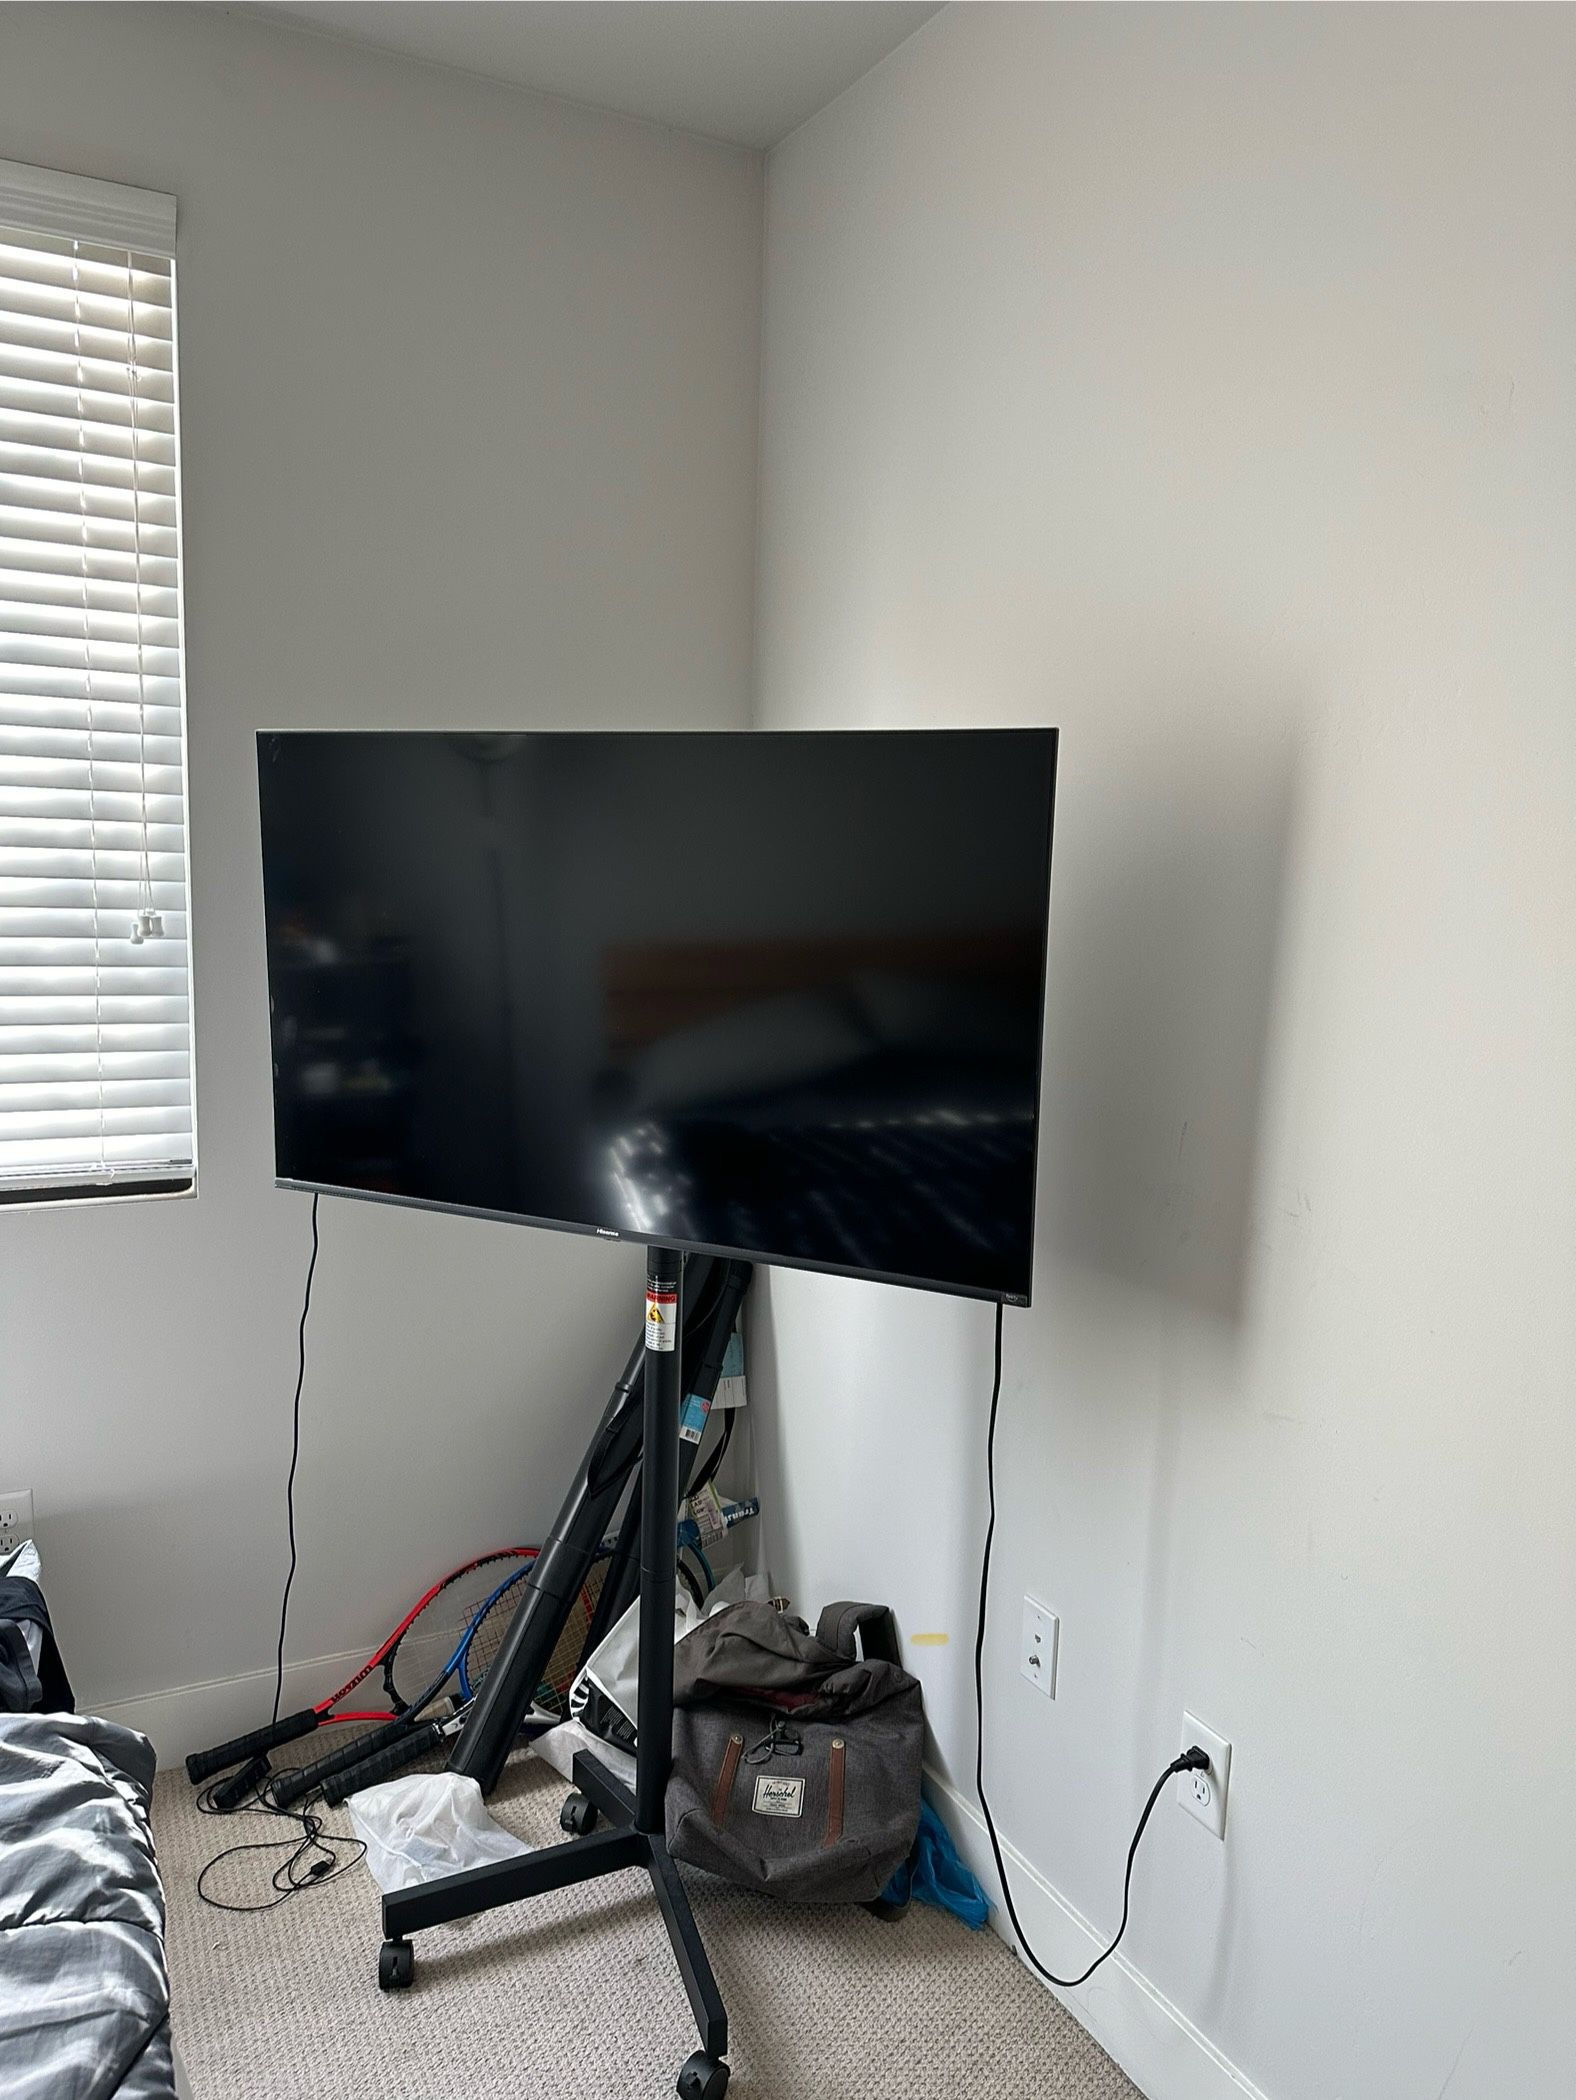 Hisense 50 inch TV with a mobile stand